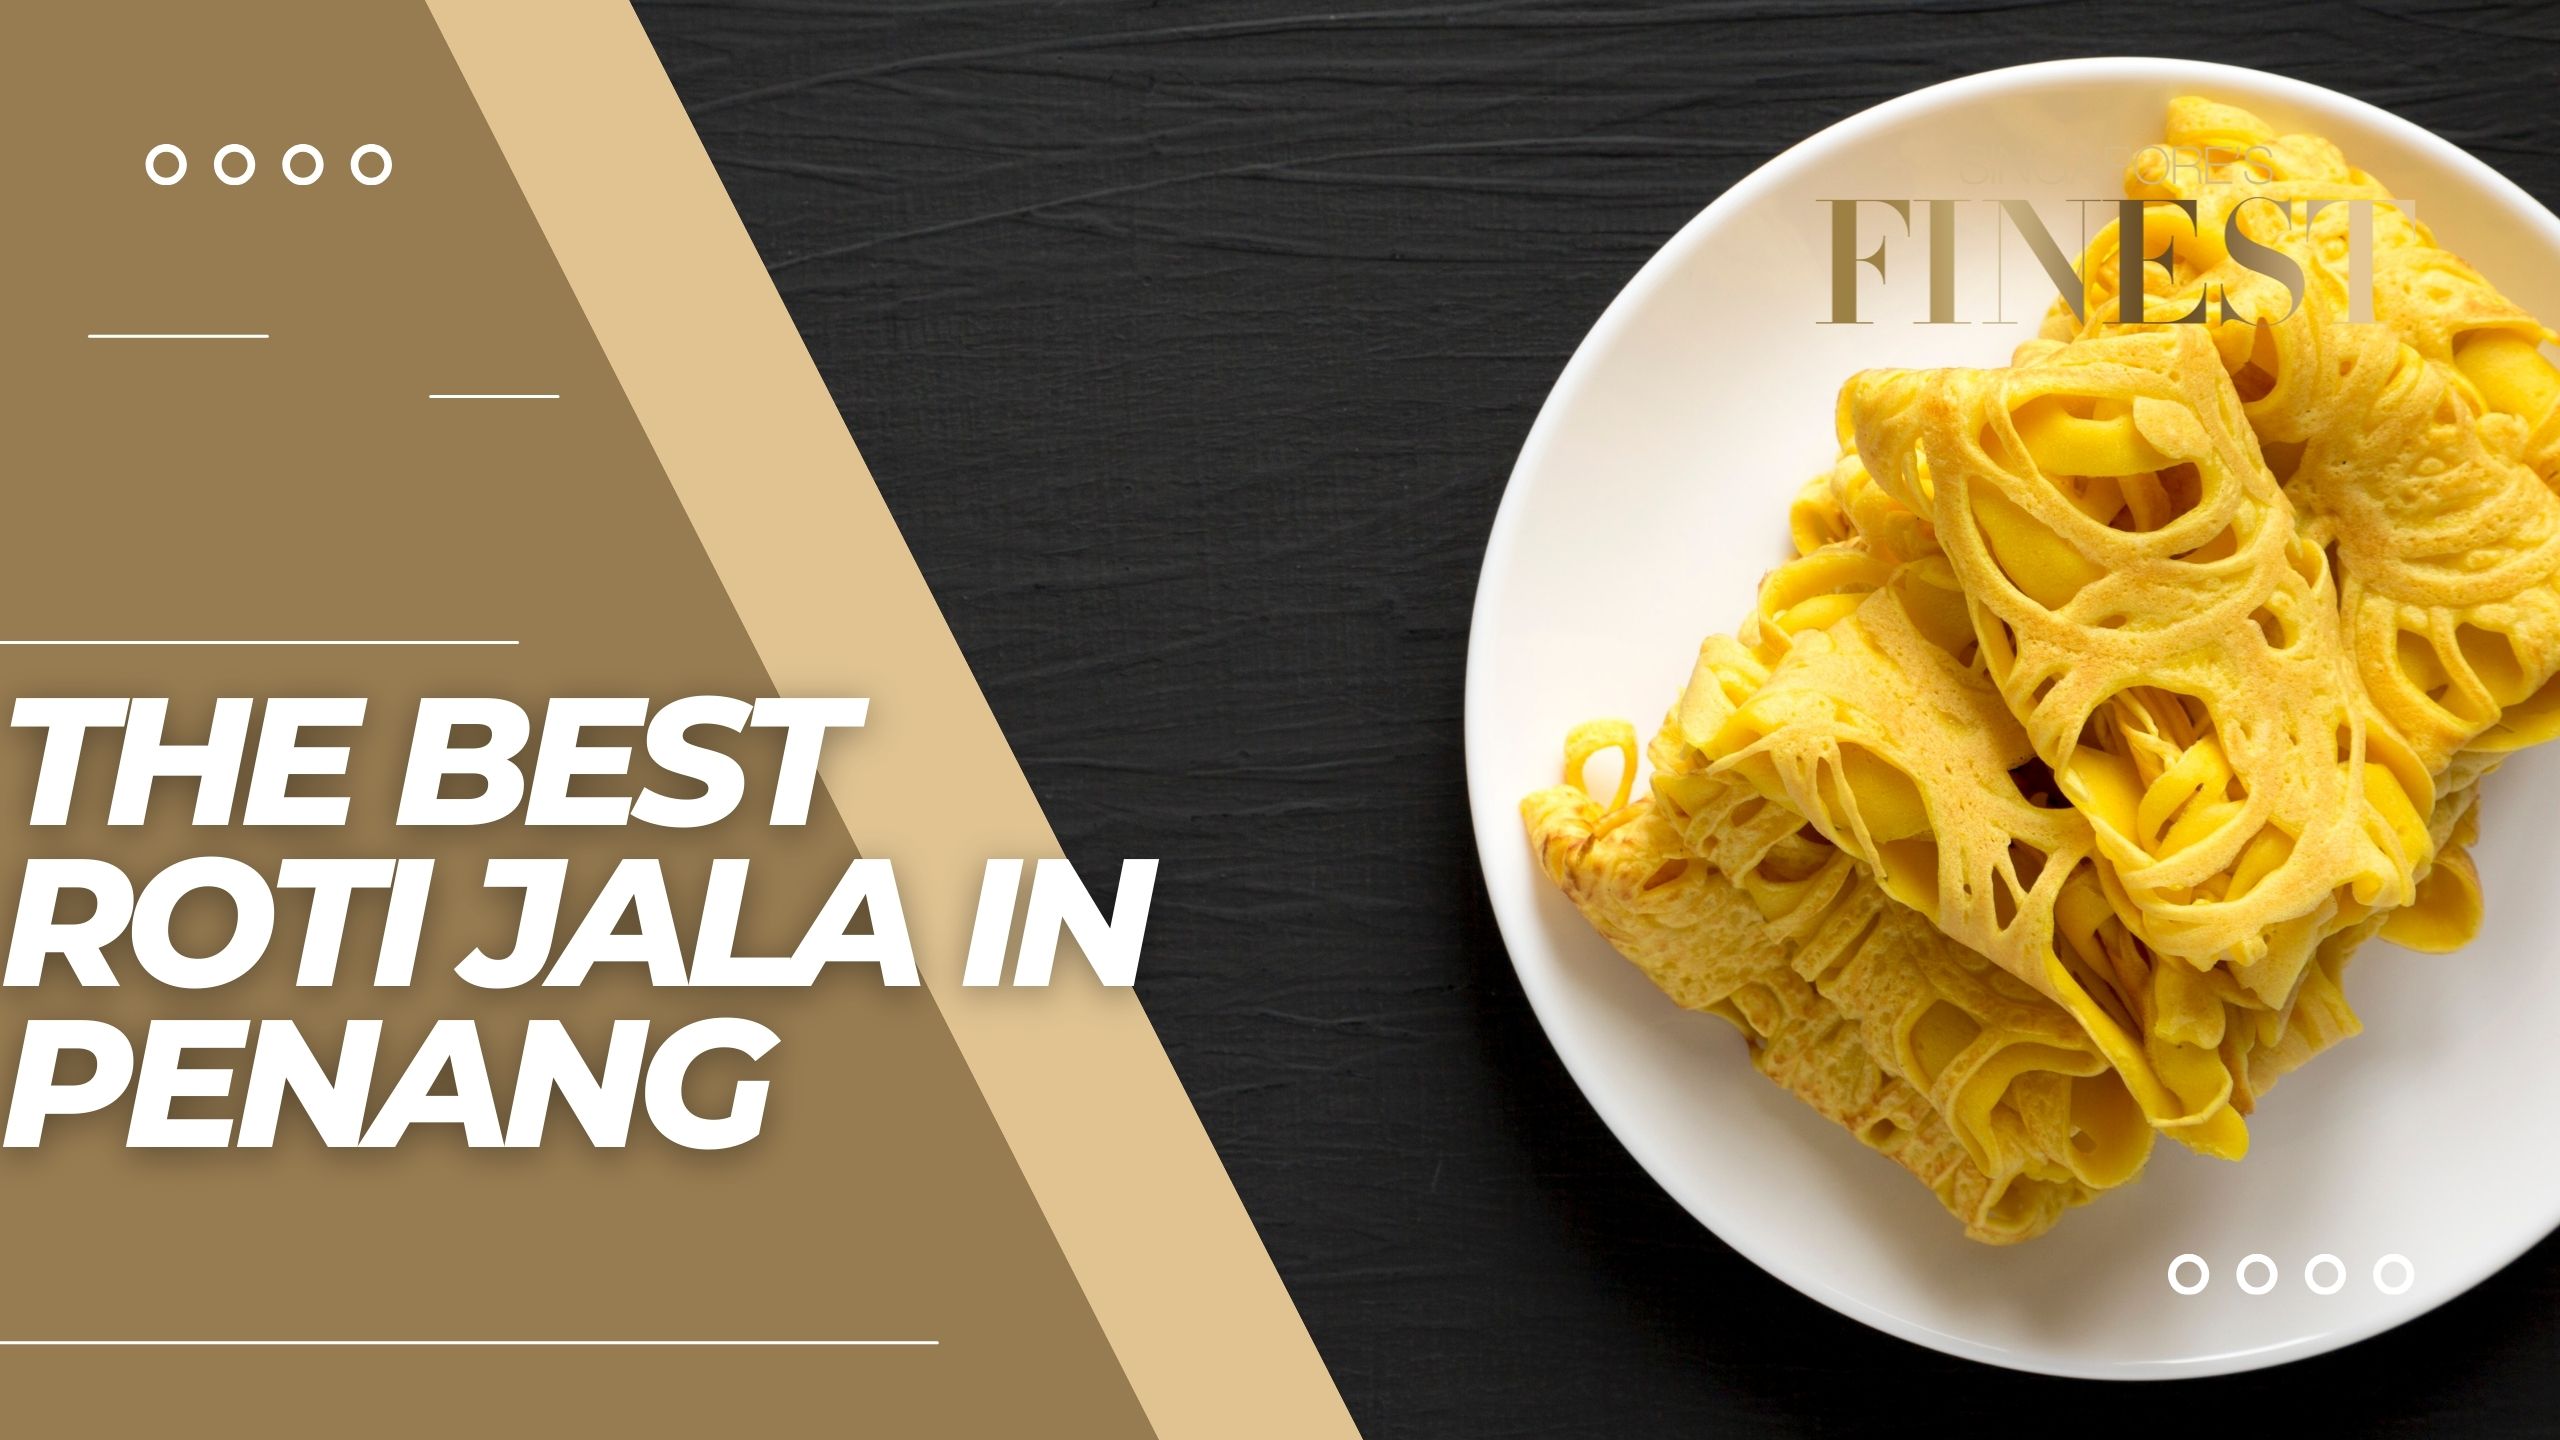 The Finest Roti Jala in Penang